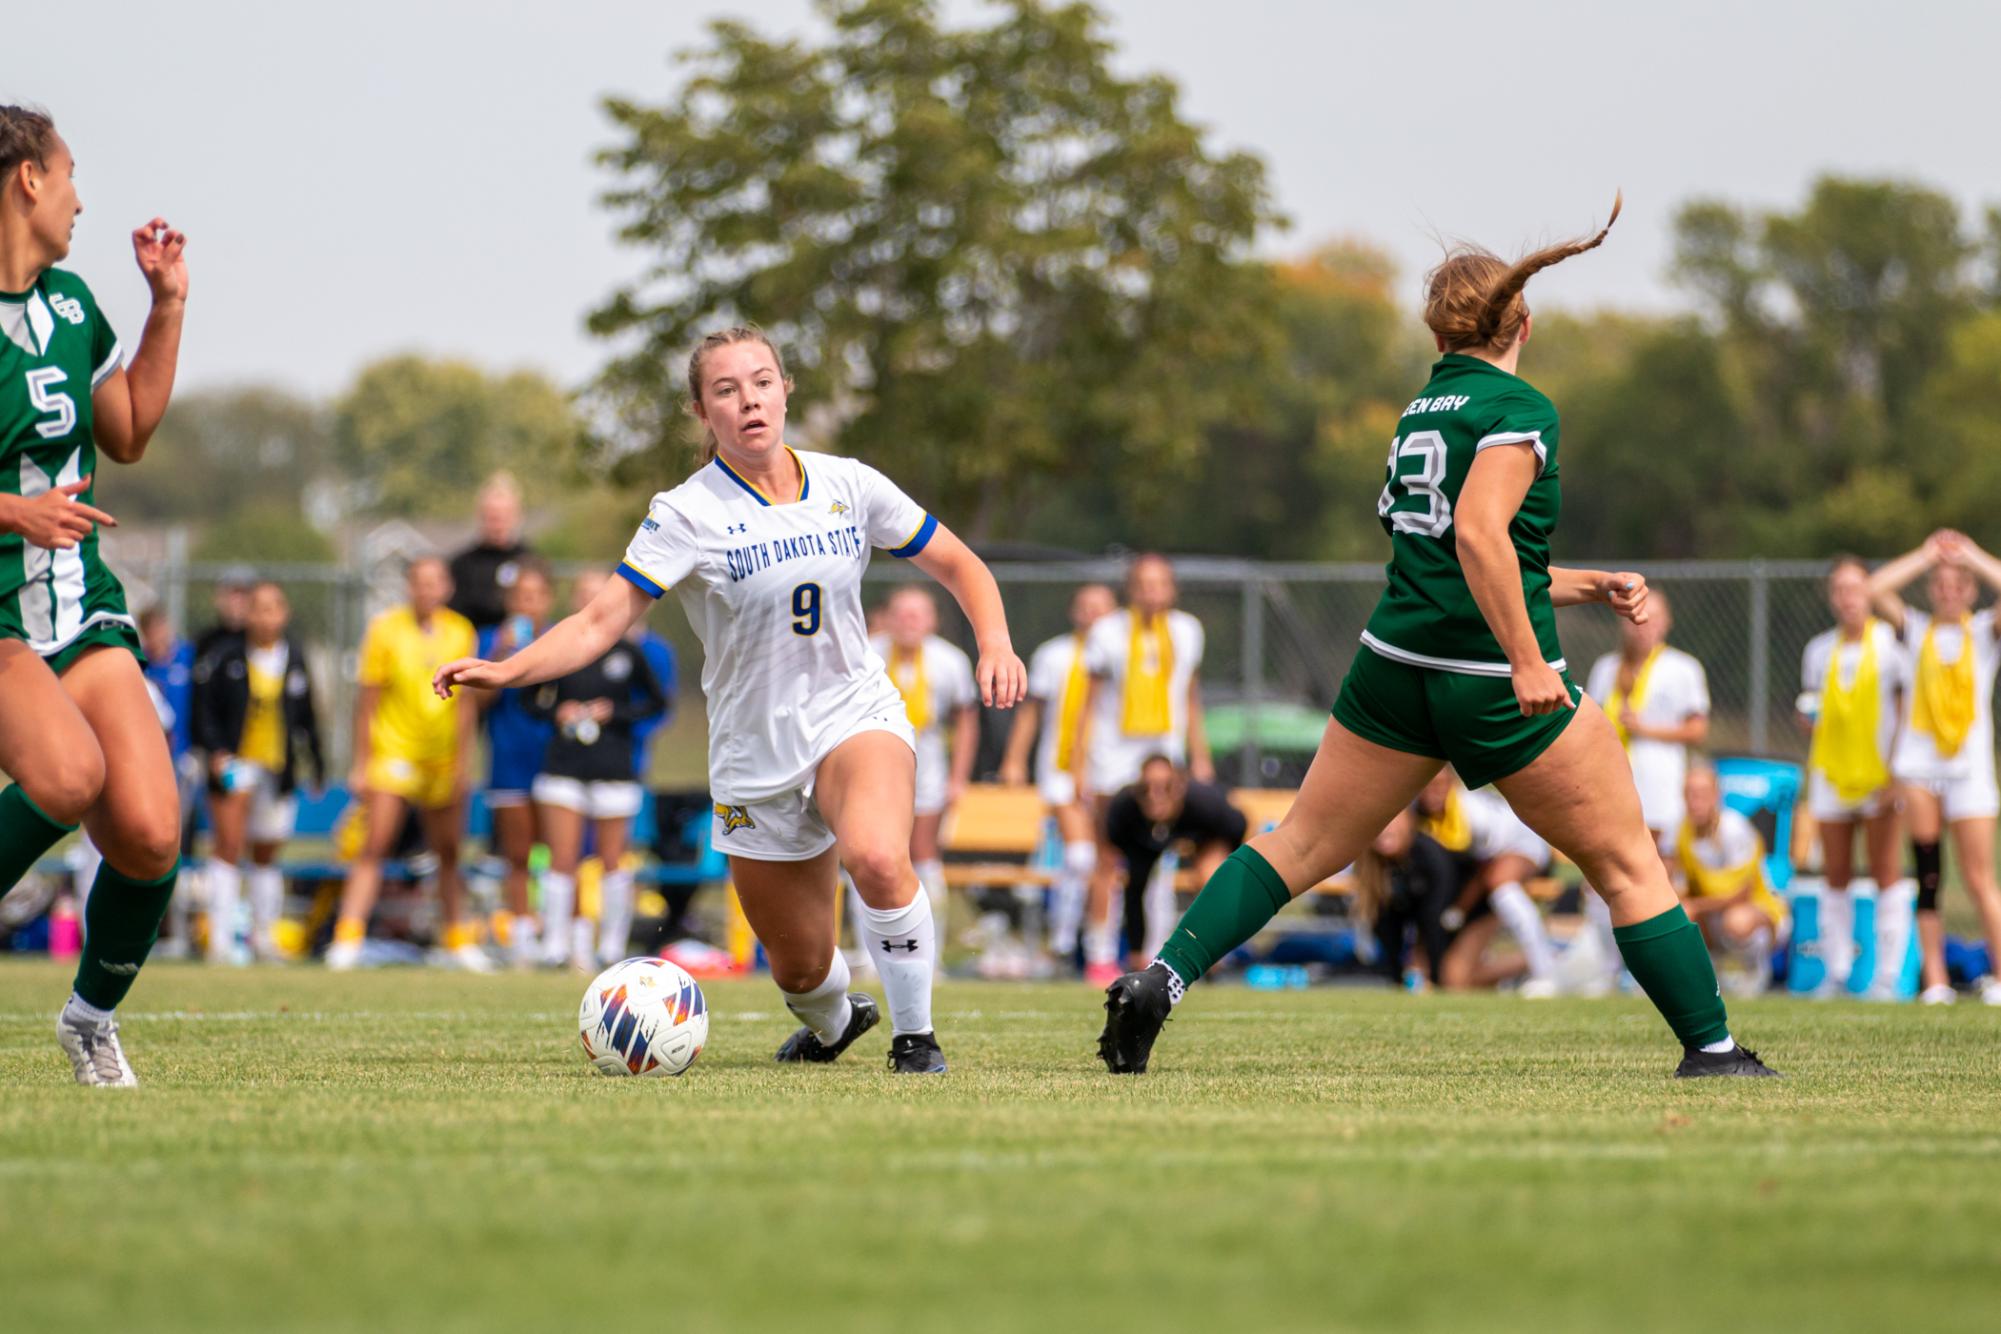 Katelyn Beulke (9) dribbles between two Green Bay defenders in a soccer match at Fishback Soccer Park in Brookings Sunday, Sept. 10, 2023.